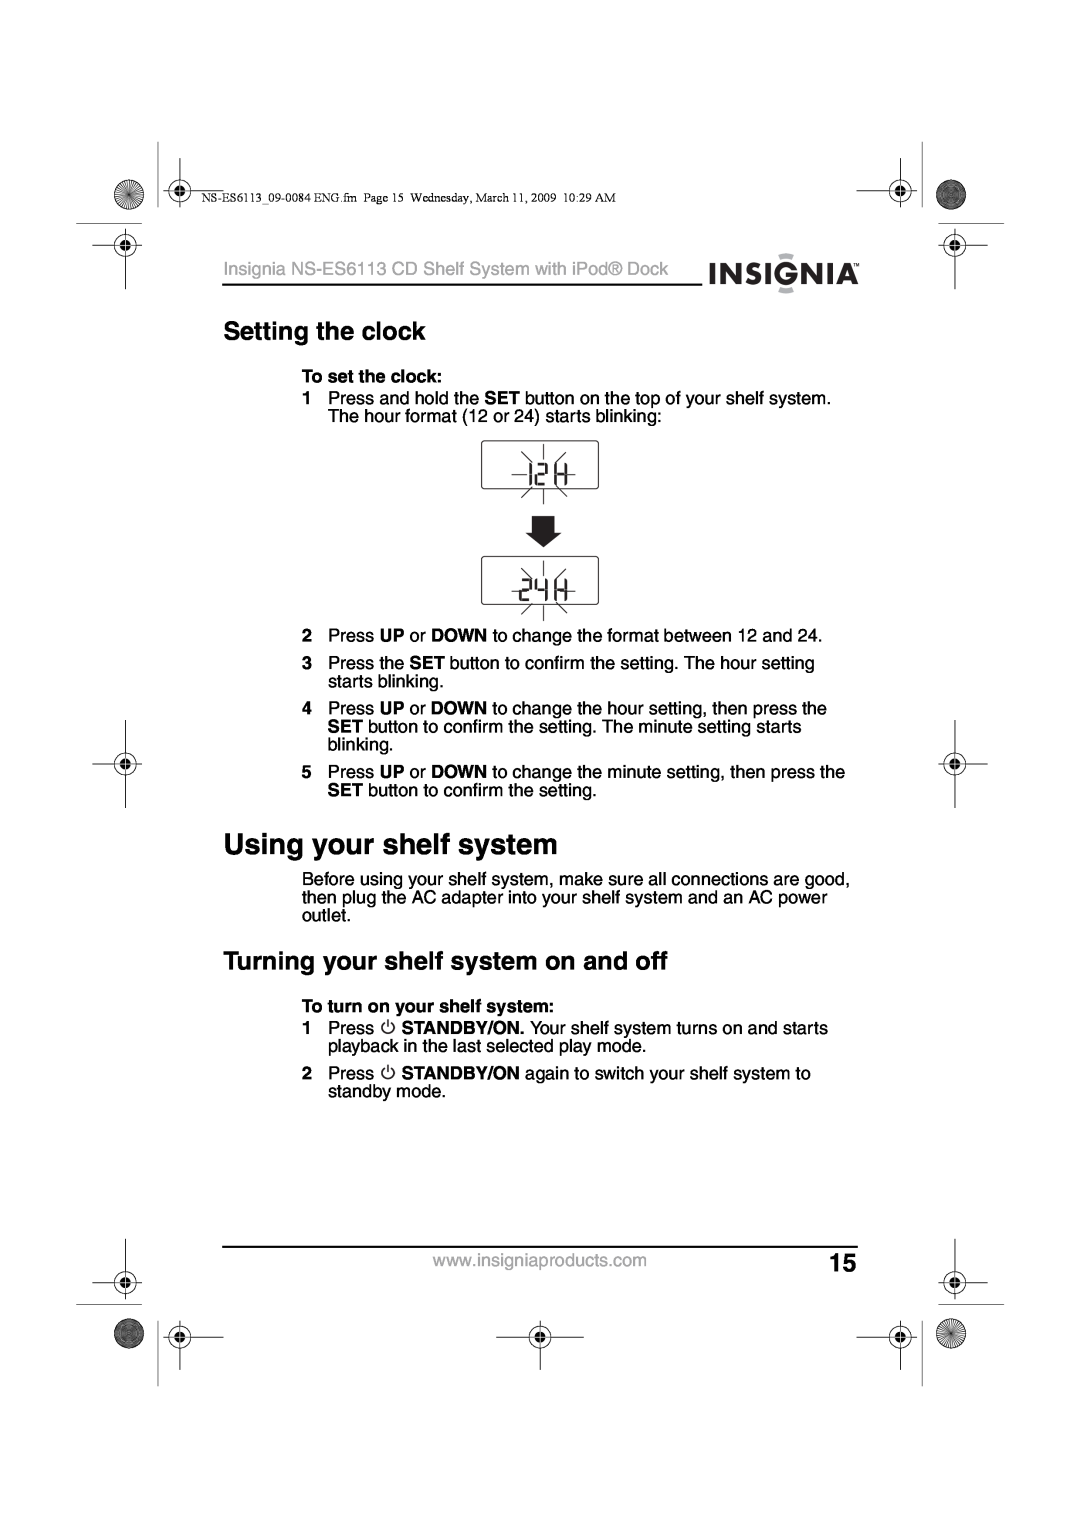 Insignia NS-ES6113 Using your shelf system, Setting the clock, Turning your shelf system on and off, To set the clock 